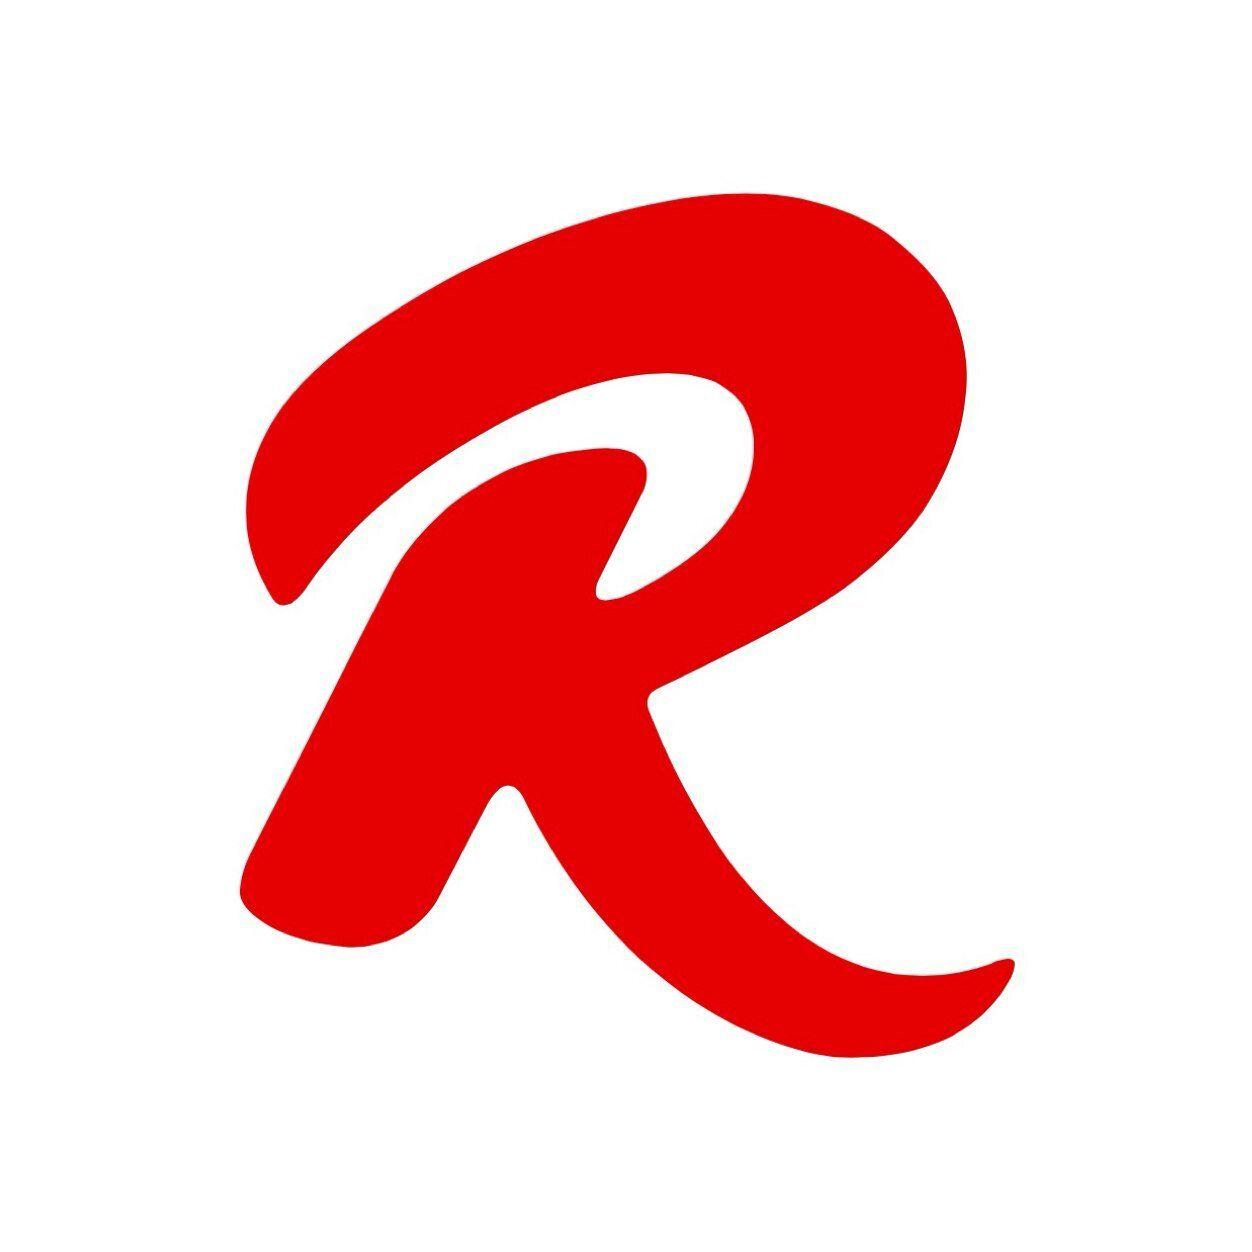 Cool Red R Logo - cool letter r.wagenaardentistry.com